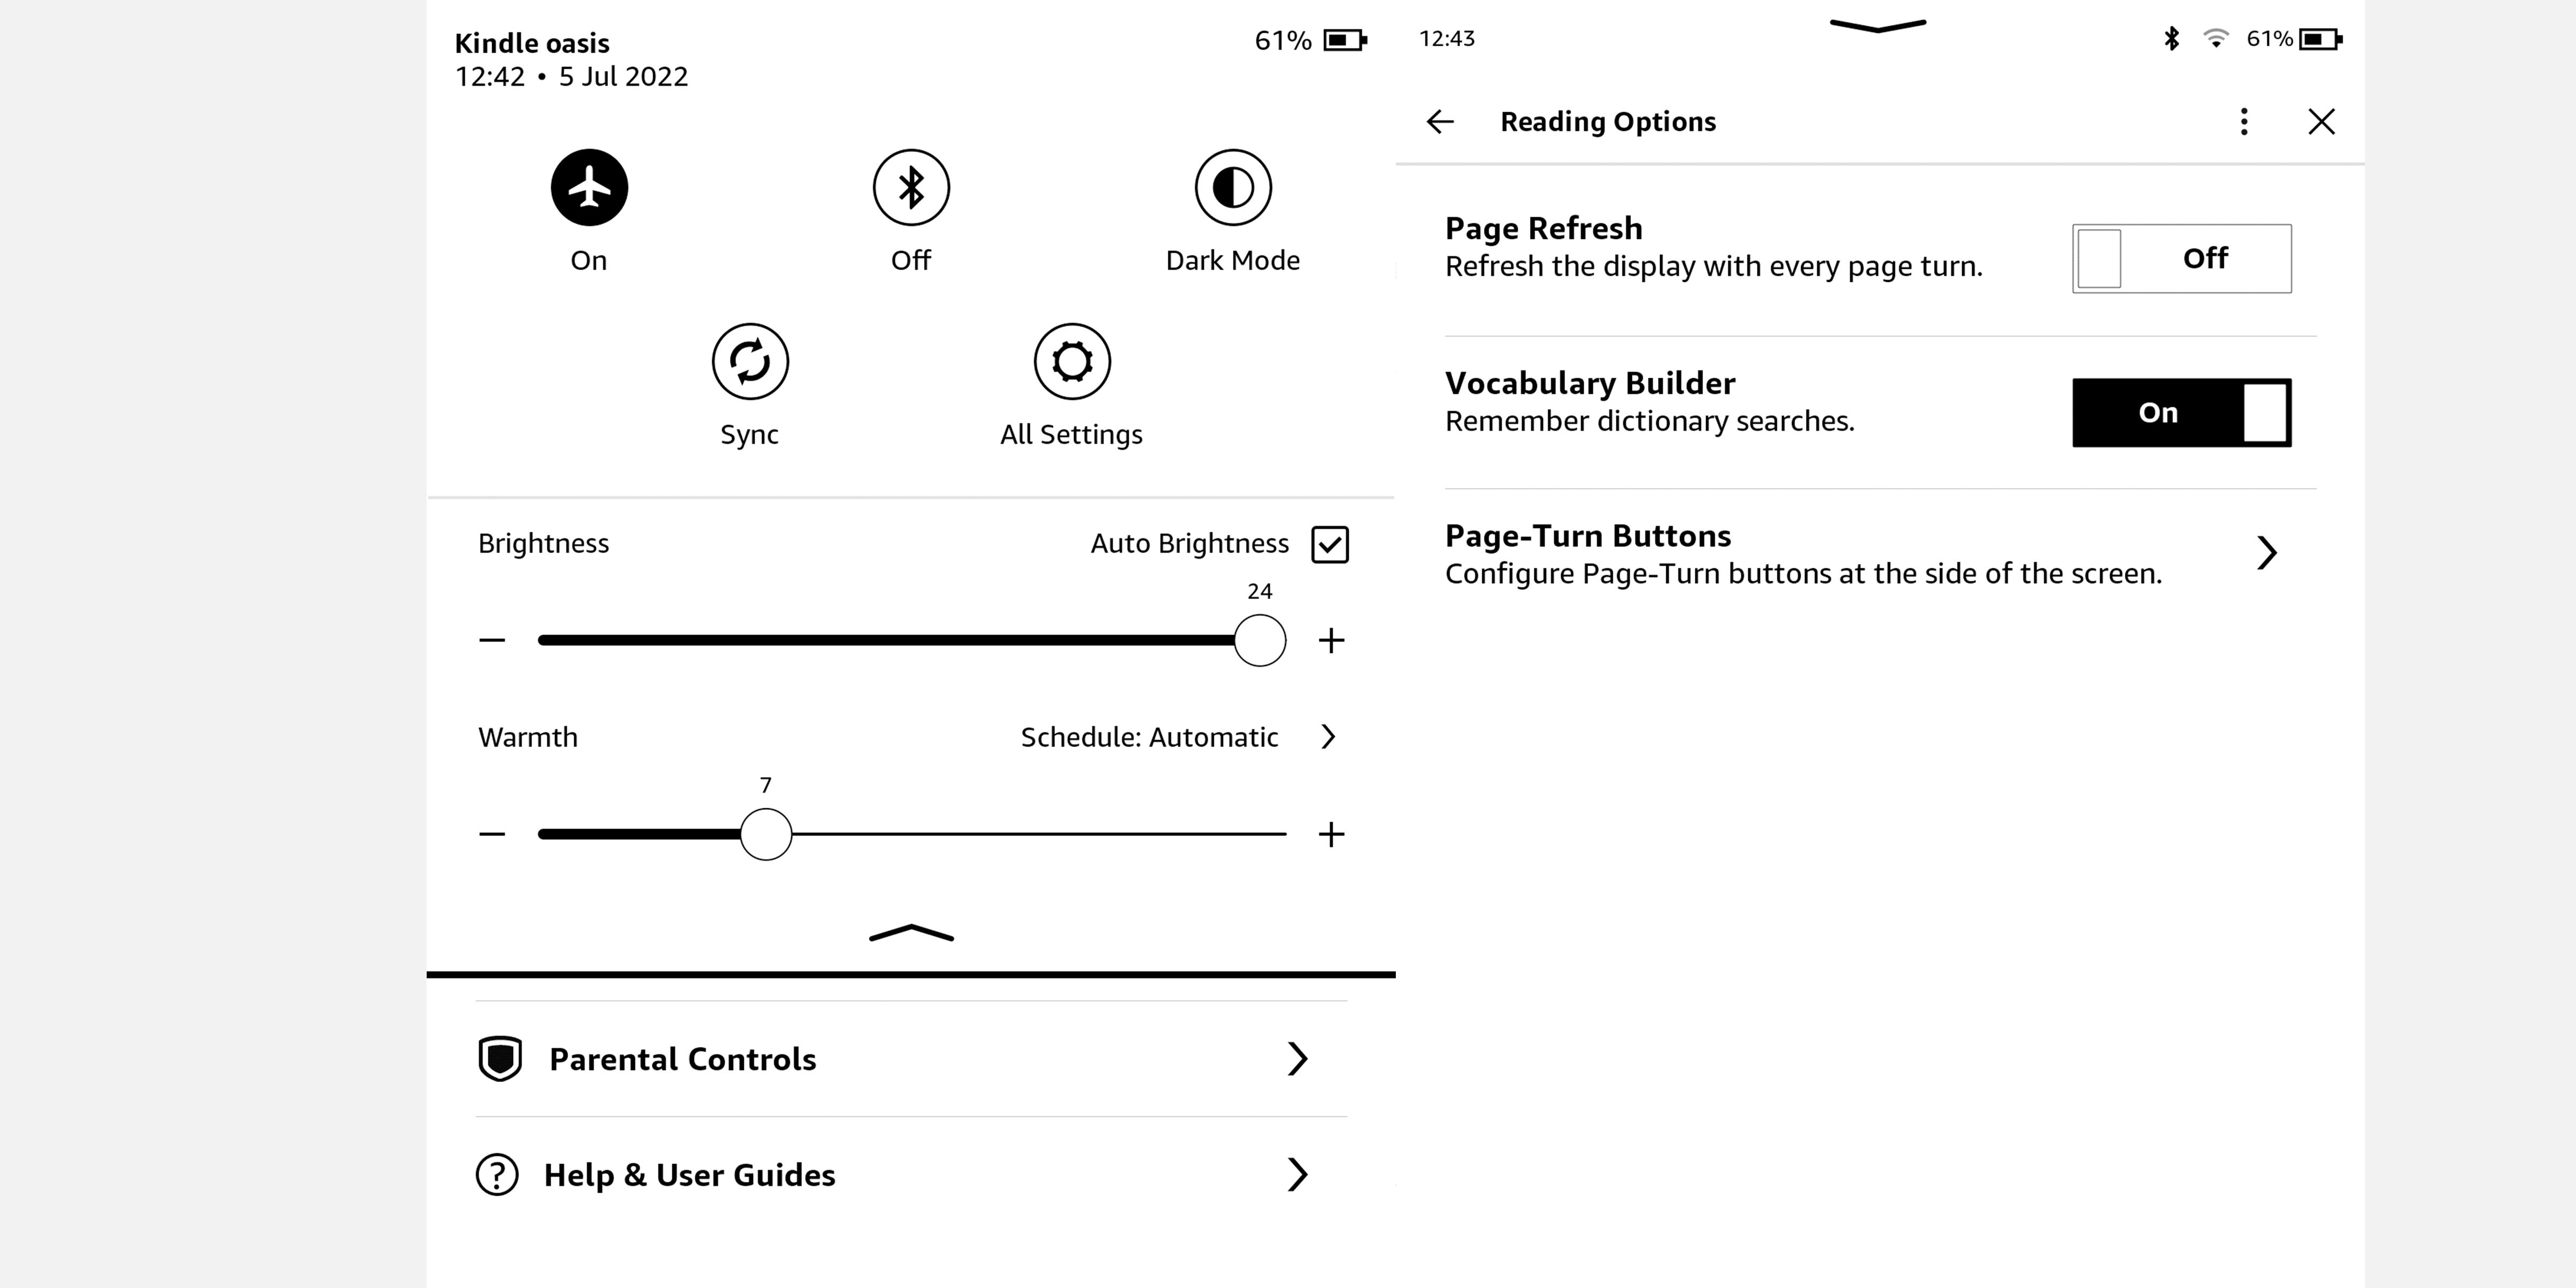 Screenshots showing airplane mode and page refresh options in Kindle